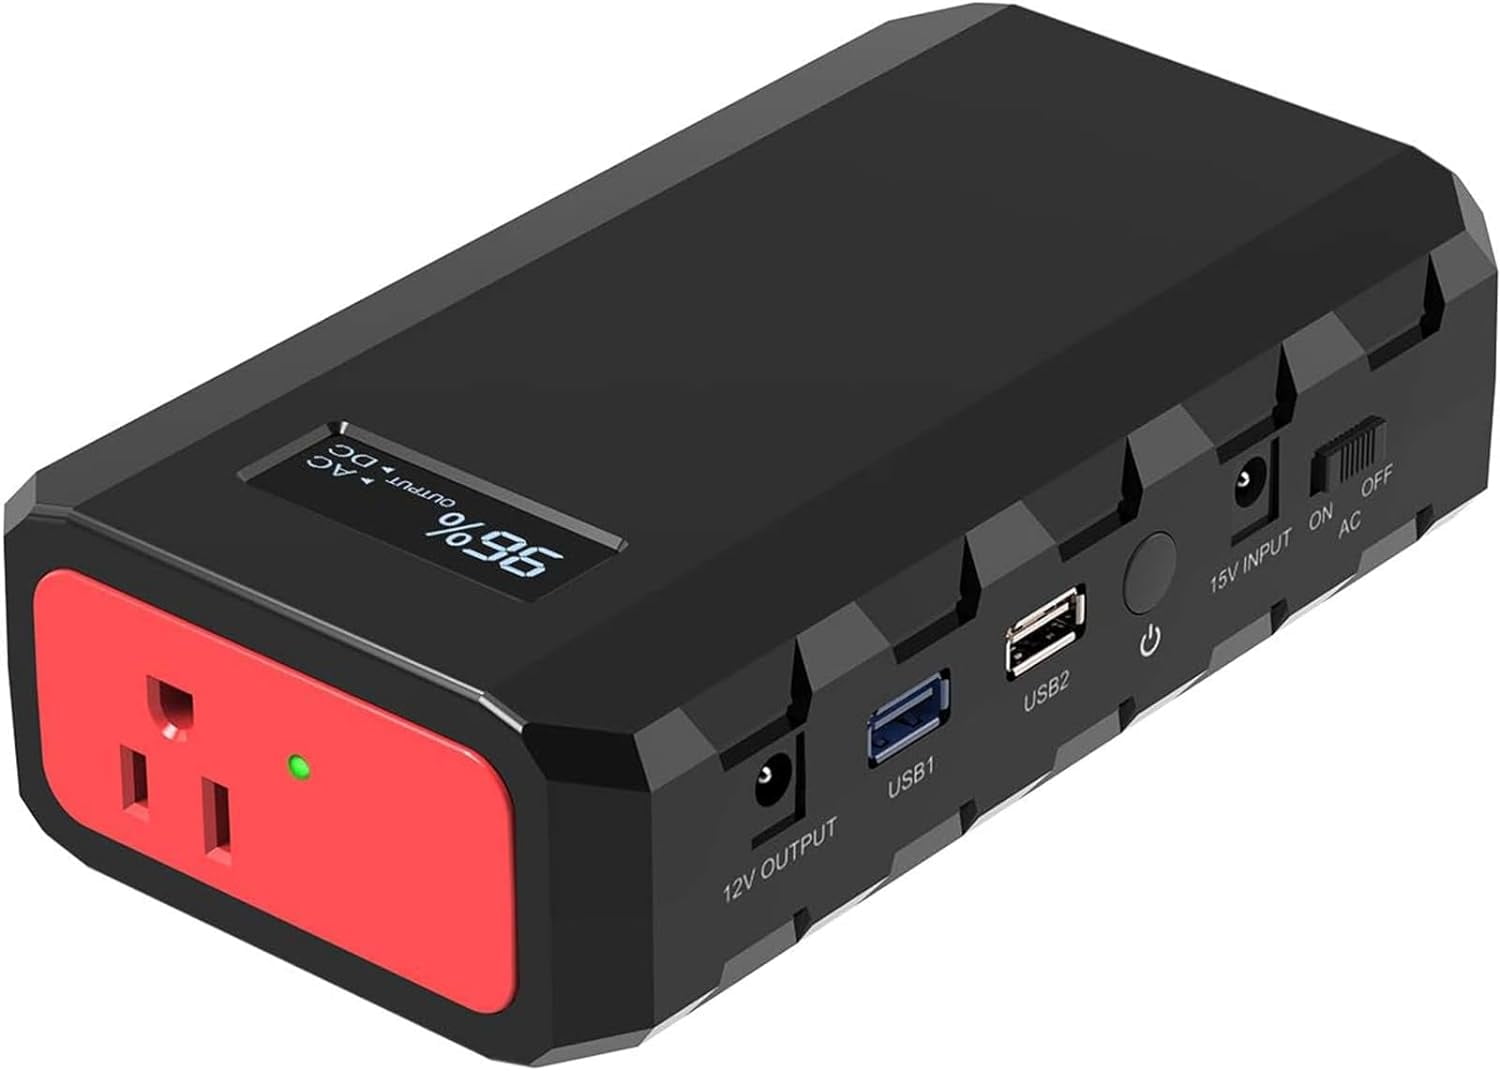  27000mAh Power Bank with 100W AC Outlet,60W PD Type-C